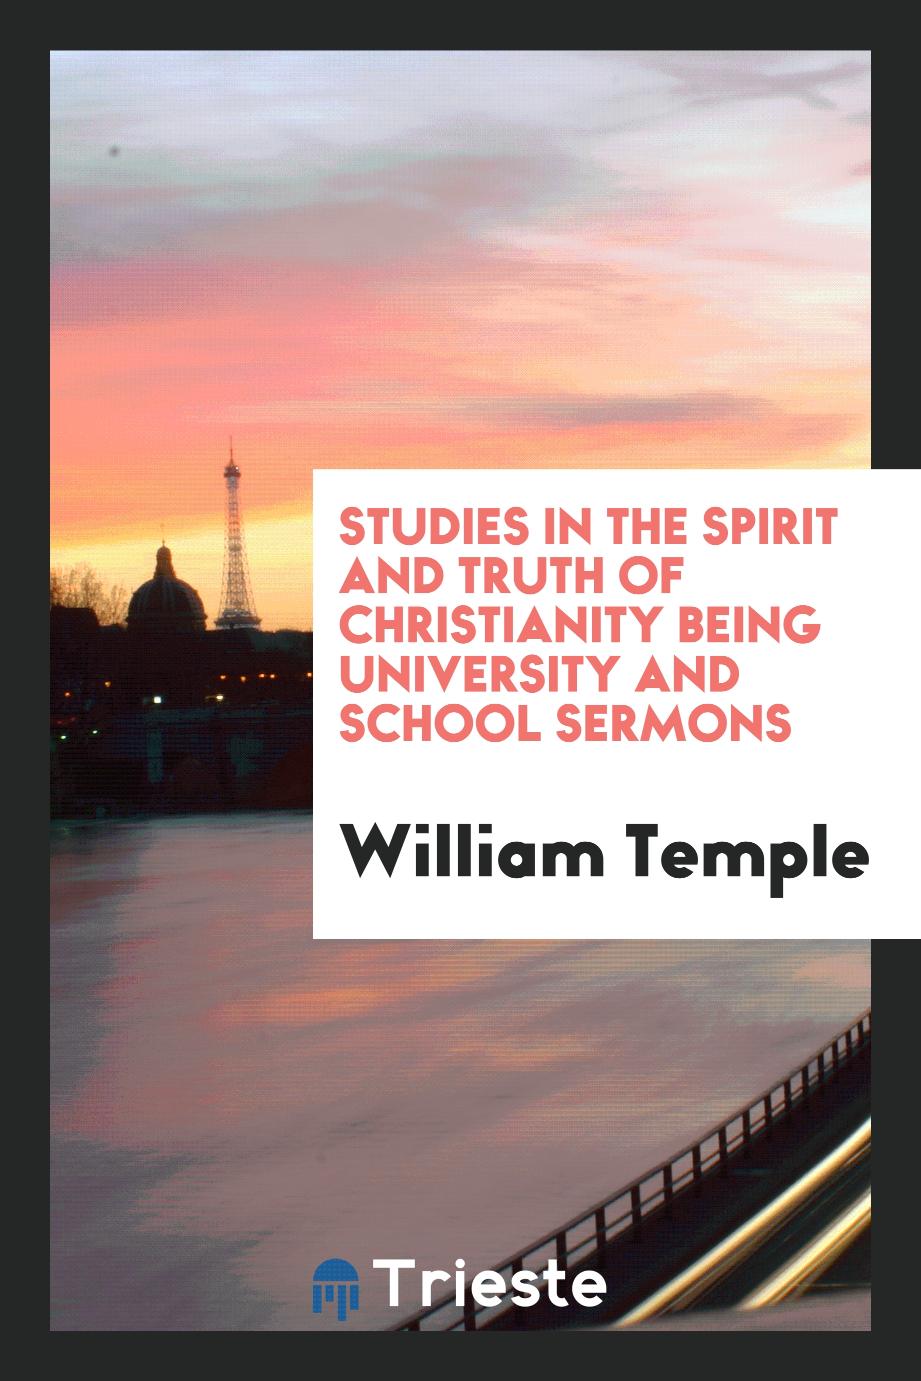 William Temple - Studies in the spirit and truth of Christianity being university and school sermons